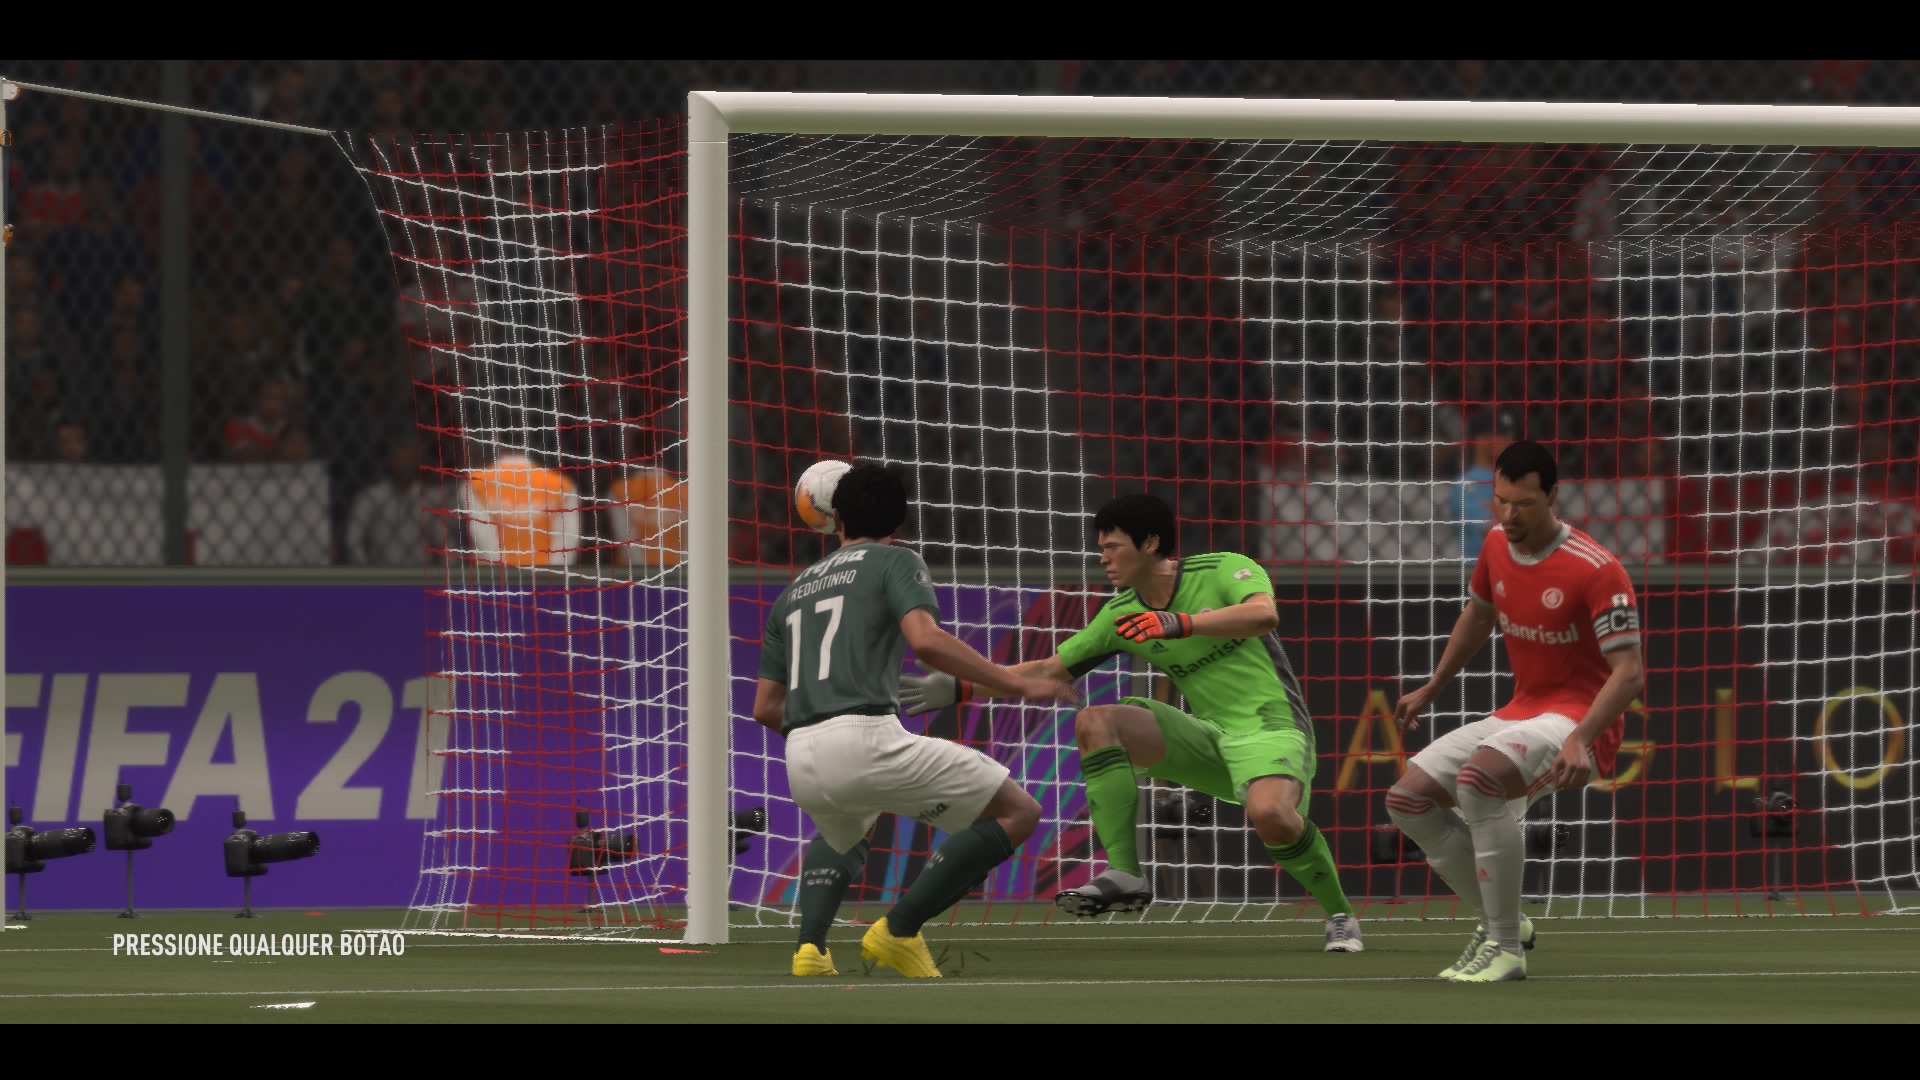 Did that ball get in? You can guarantee that by going back in time in FIFA 21